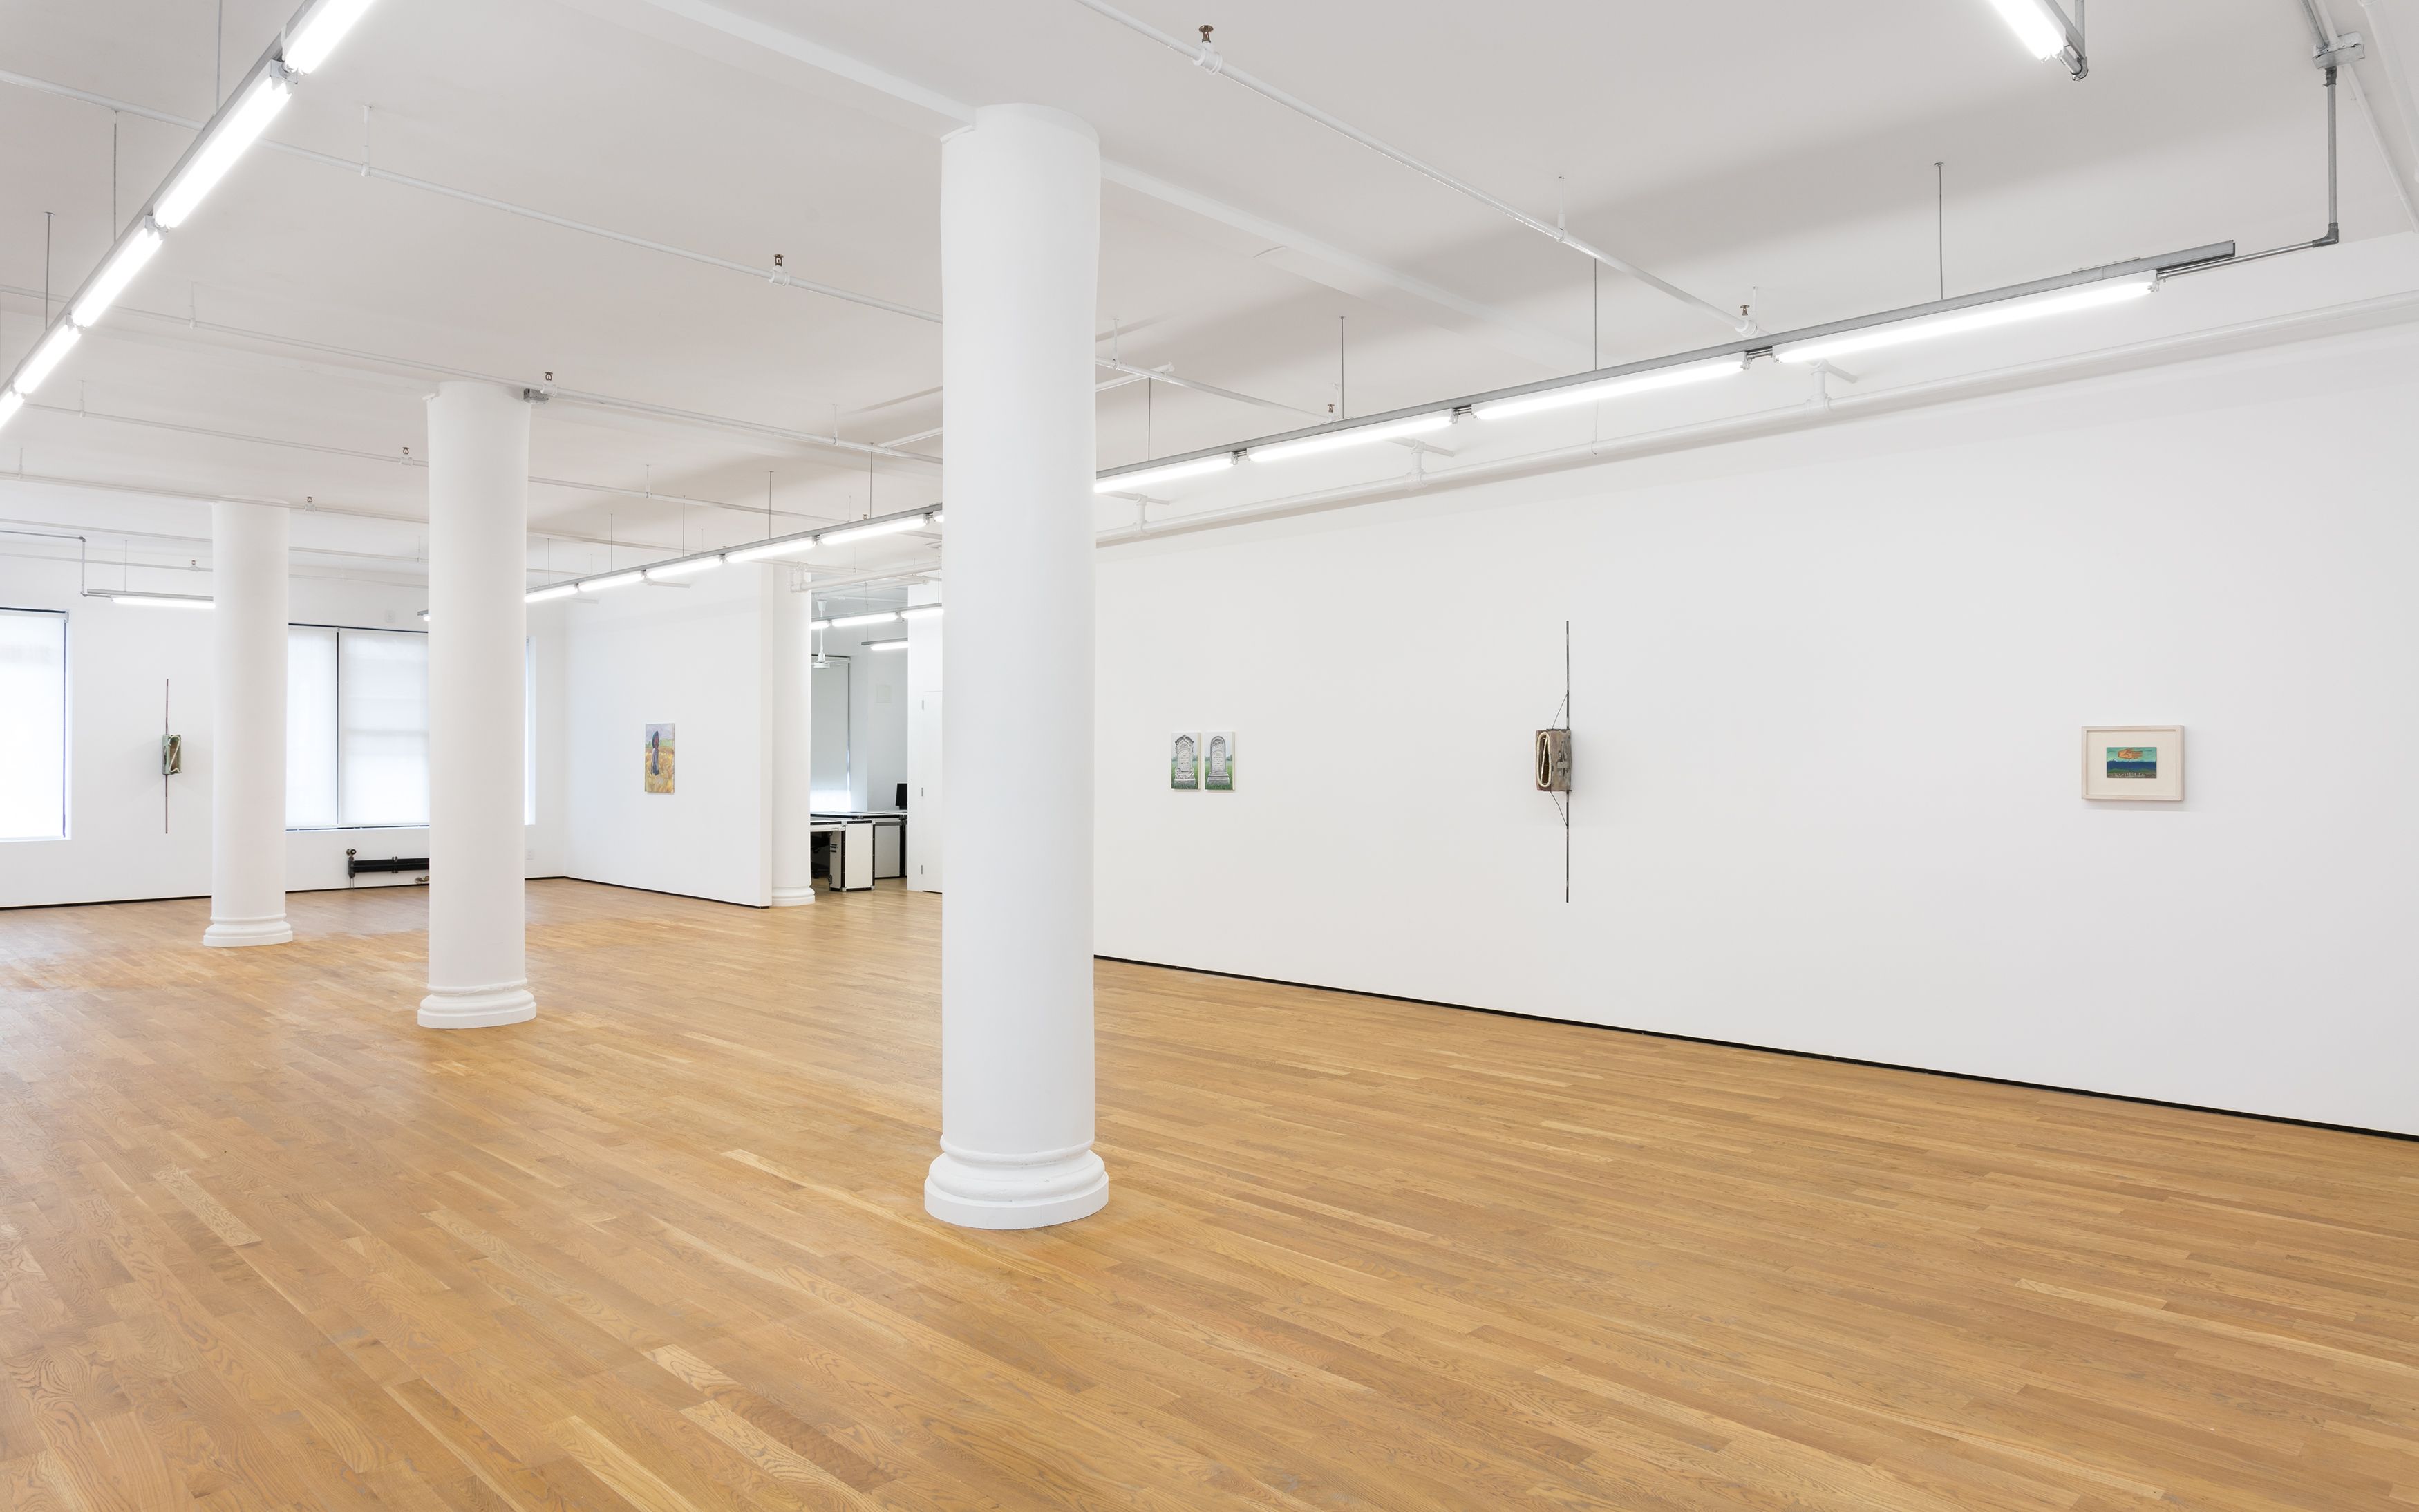 Figure in a Landscape, 2018, Installation view, Foxy Production, New York 